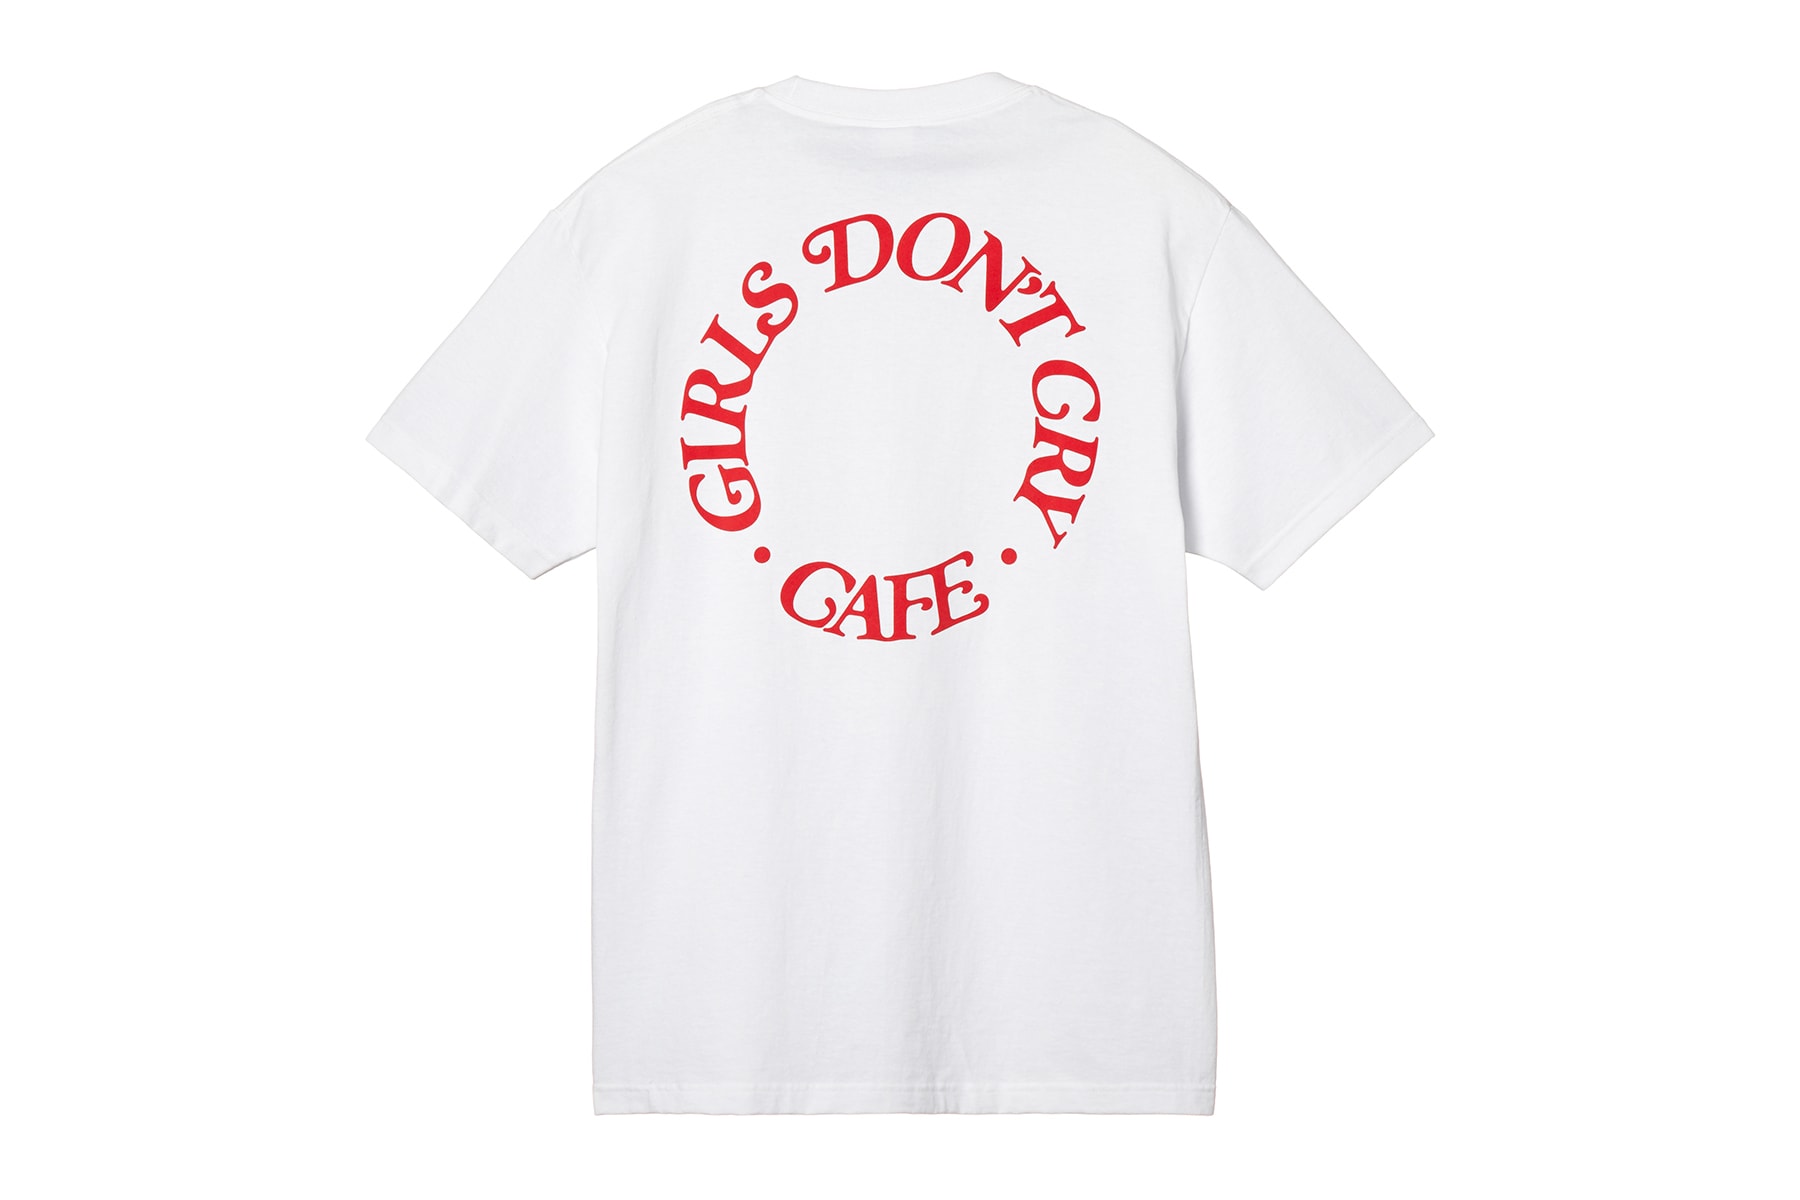 Amazon Fashion Girls Don't Cry AT TOKYO Release Cafe T-shirt Hoodie Verdy